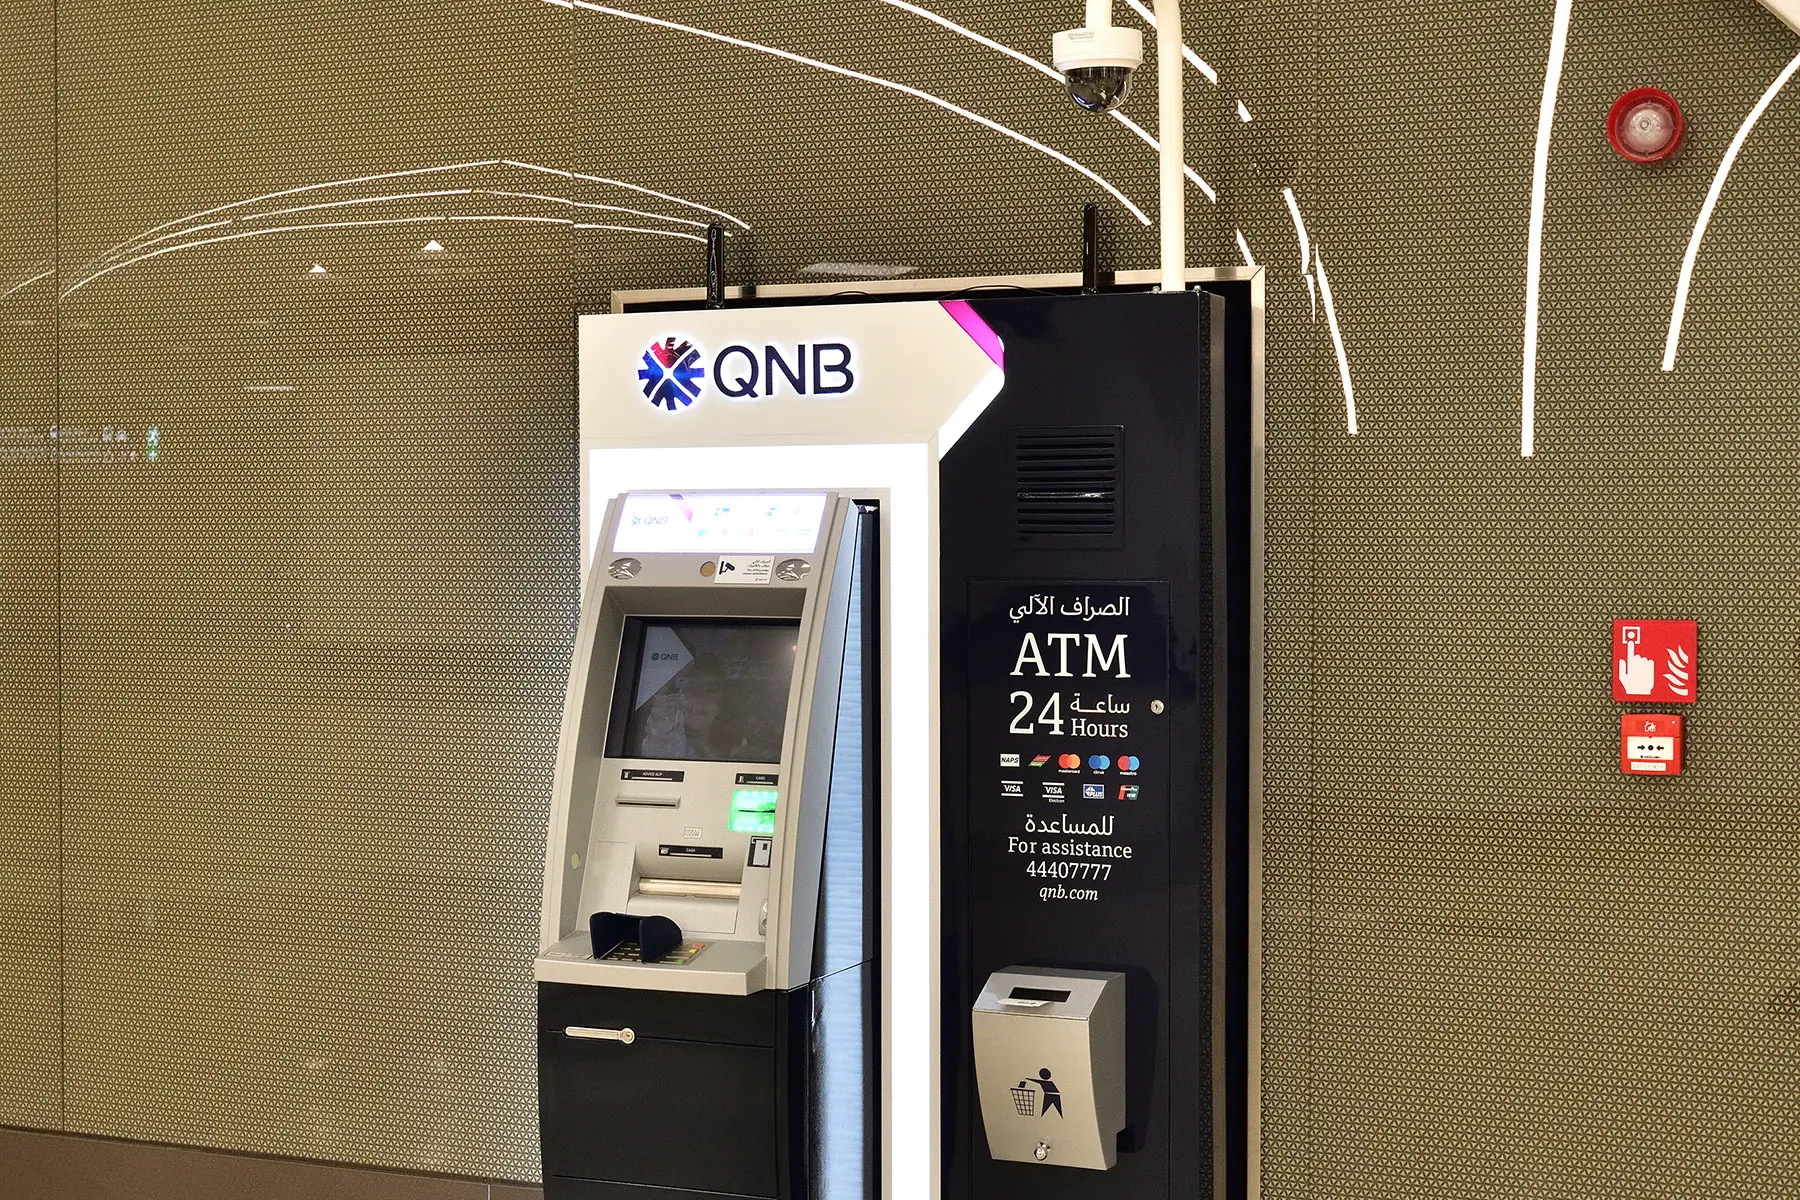 A Qatar National Bank ATM in the Doha Metro